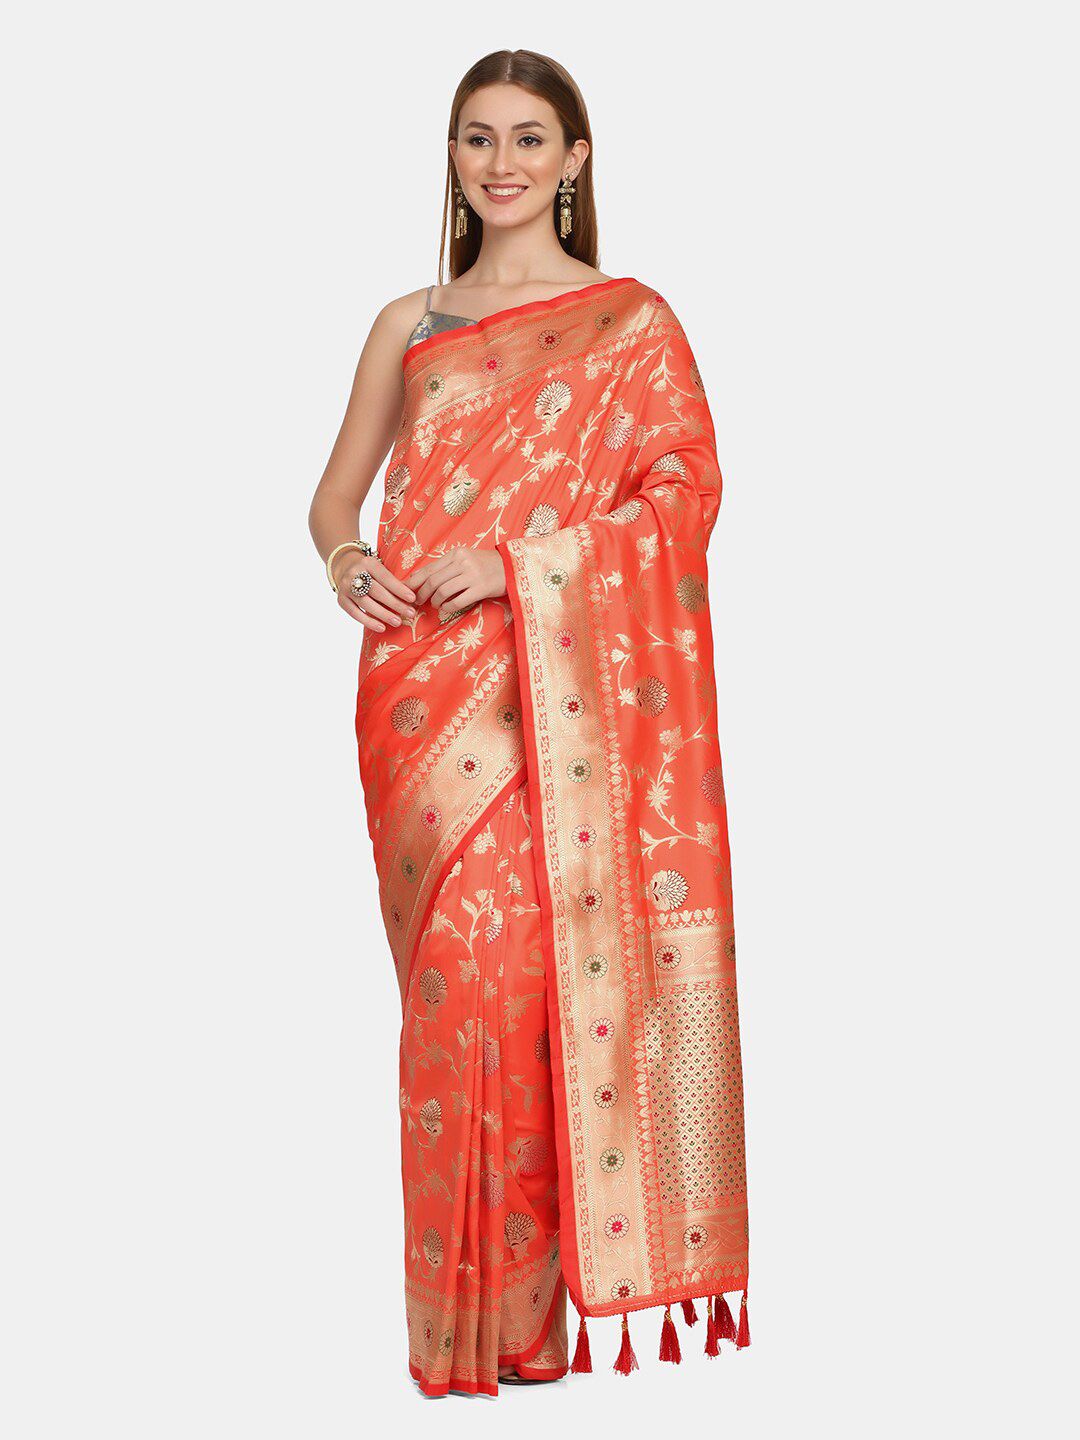 BOMBAY SELECTIONS Peach-Coloured & Gold-Toned Floral Pure Silk Banarasi Saree Price in India